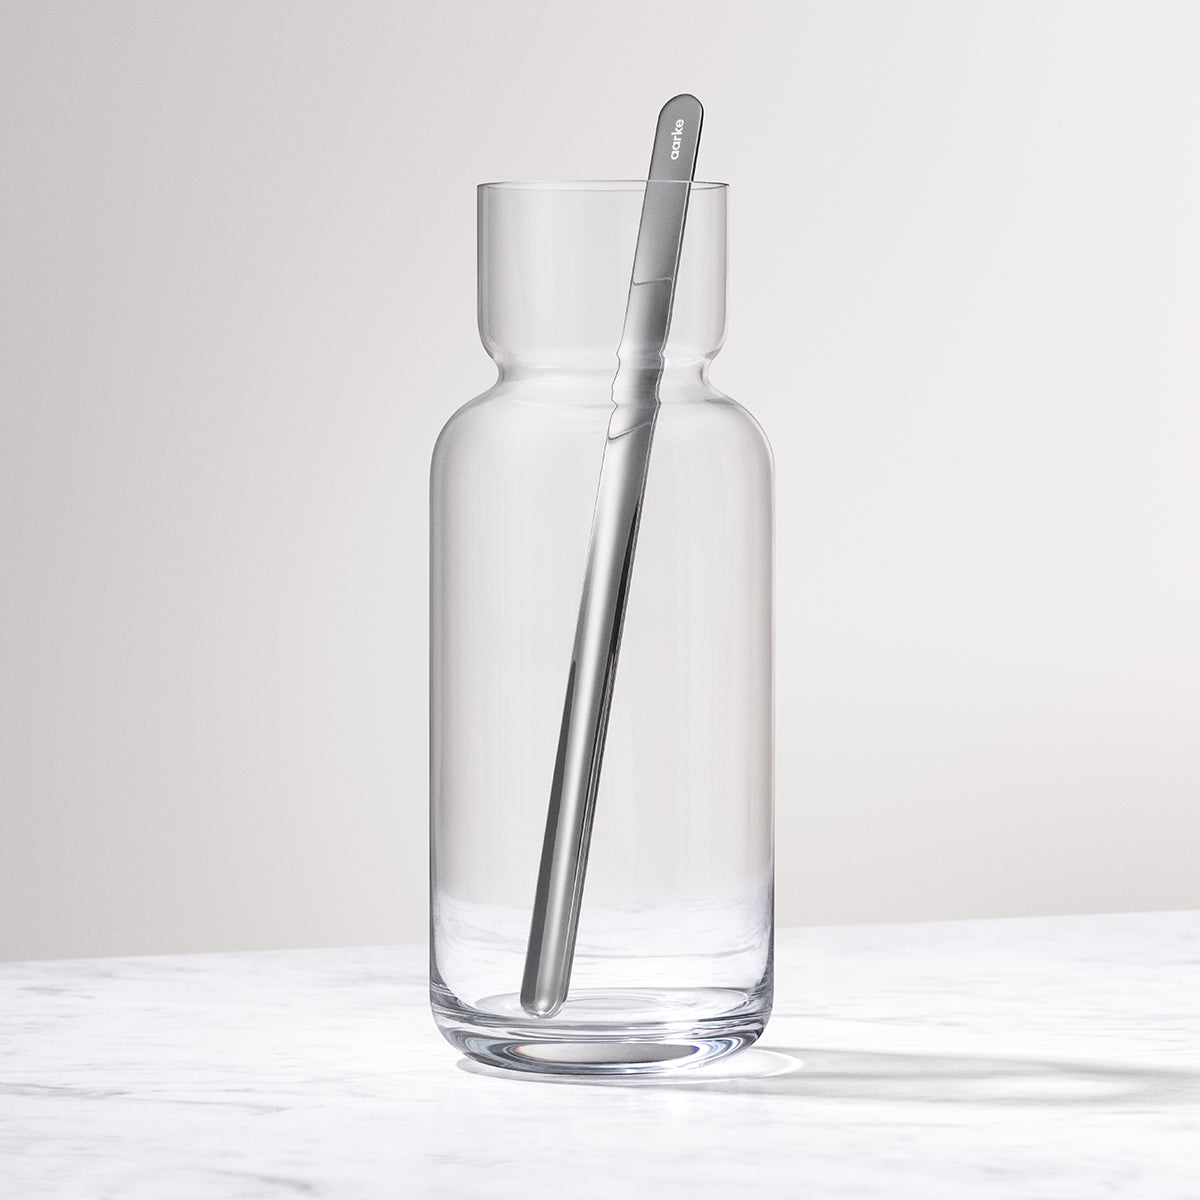 Nesting Carafe & Mixing Spoon